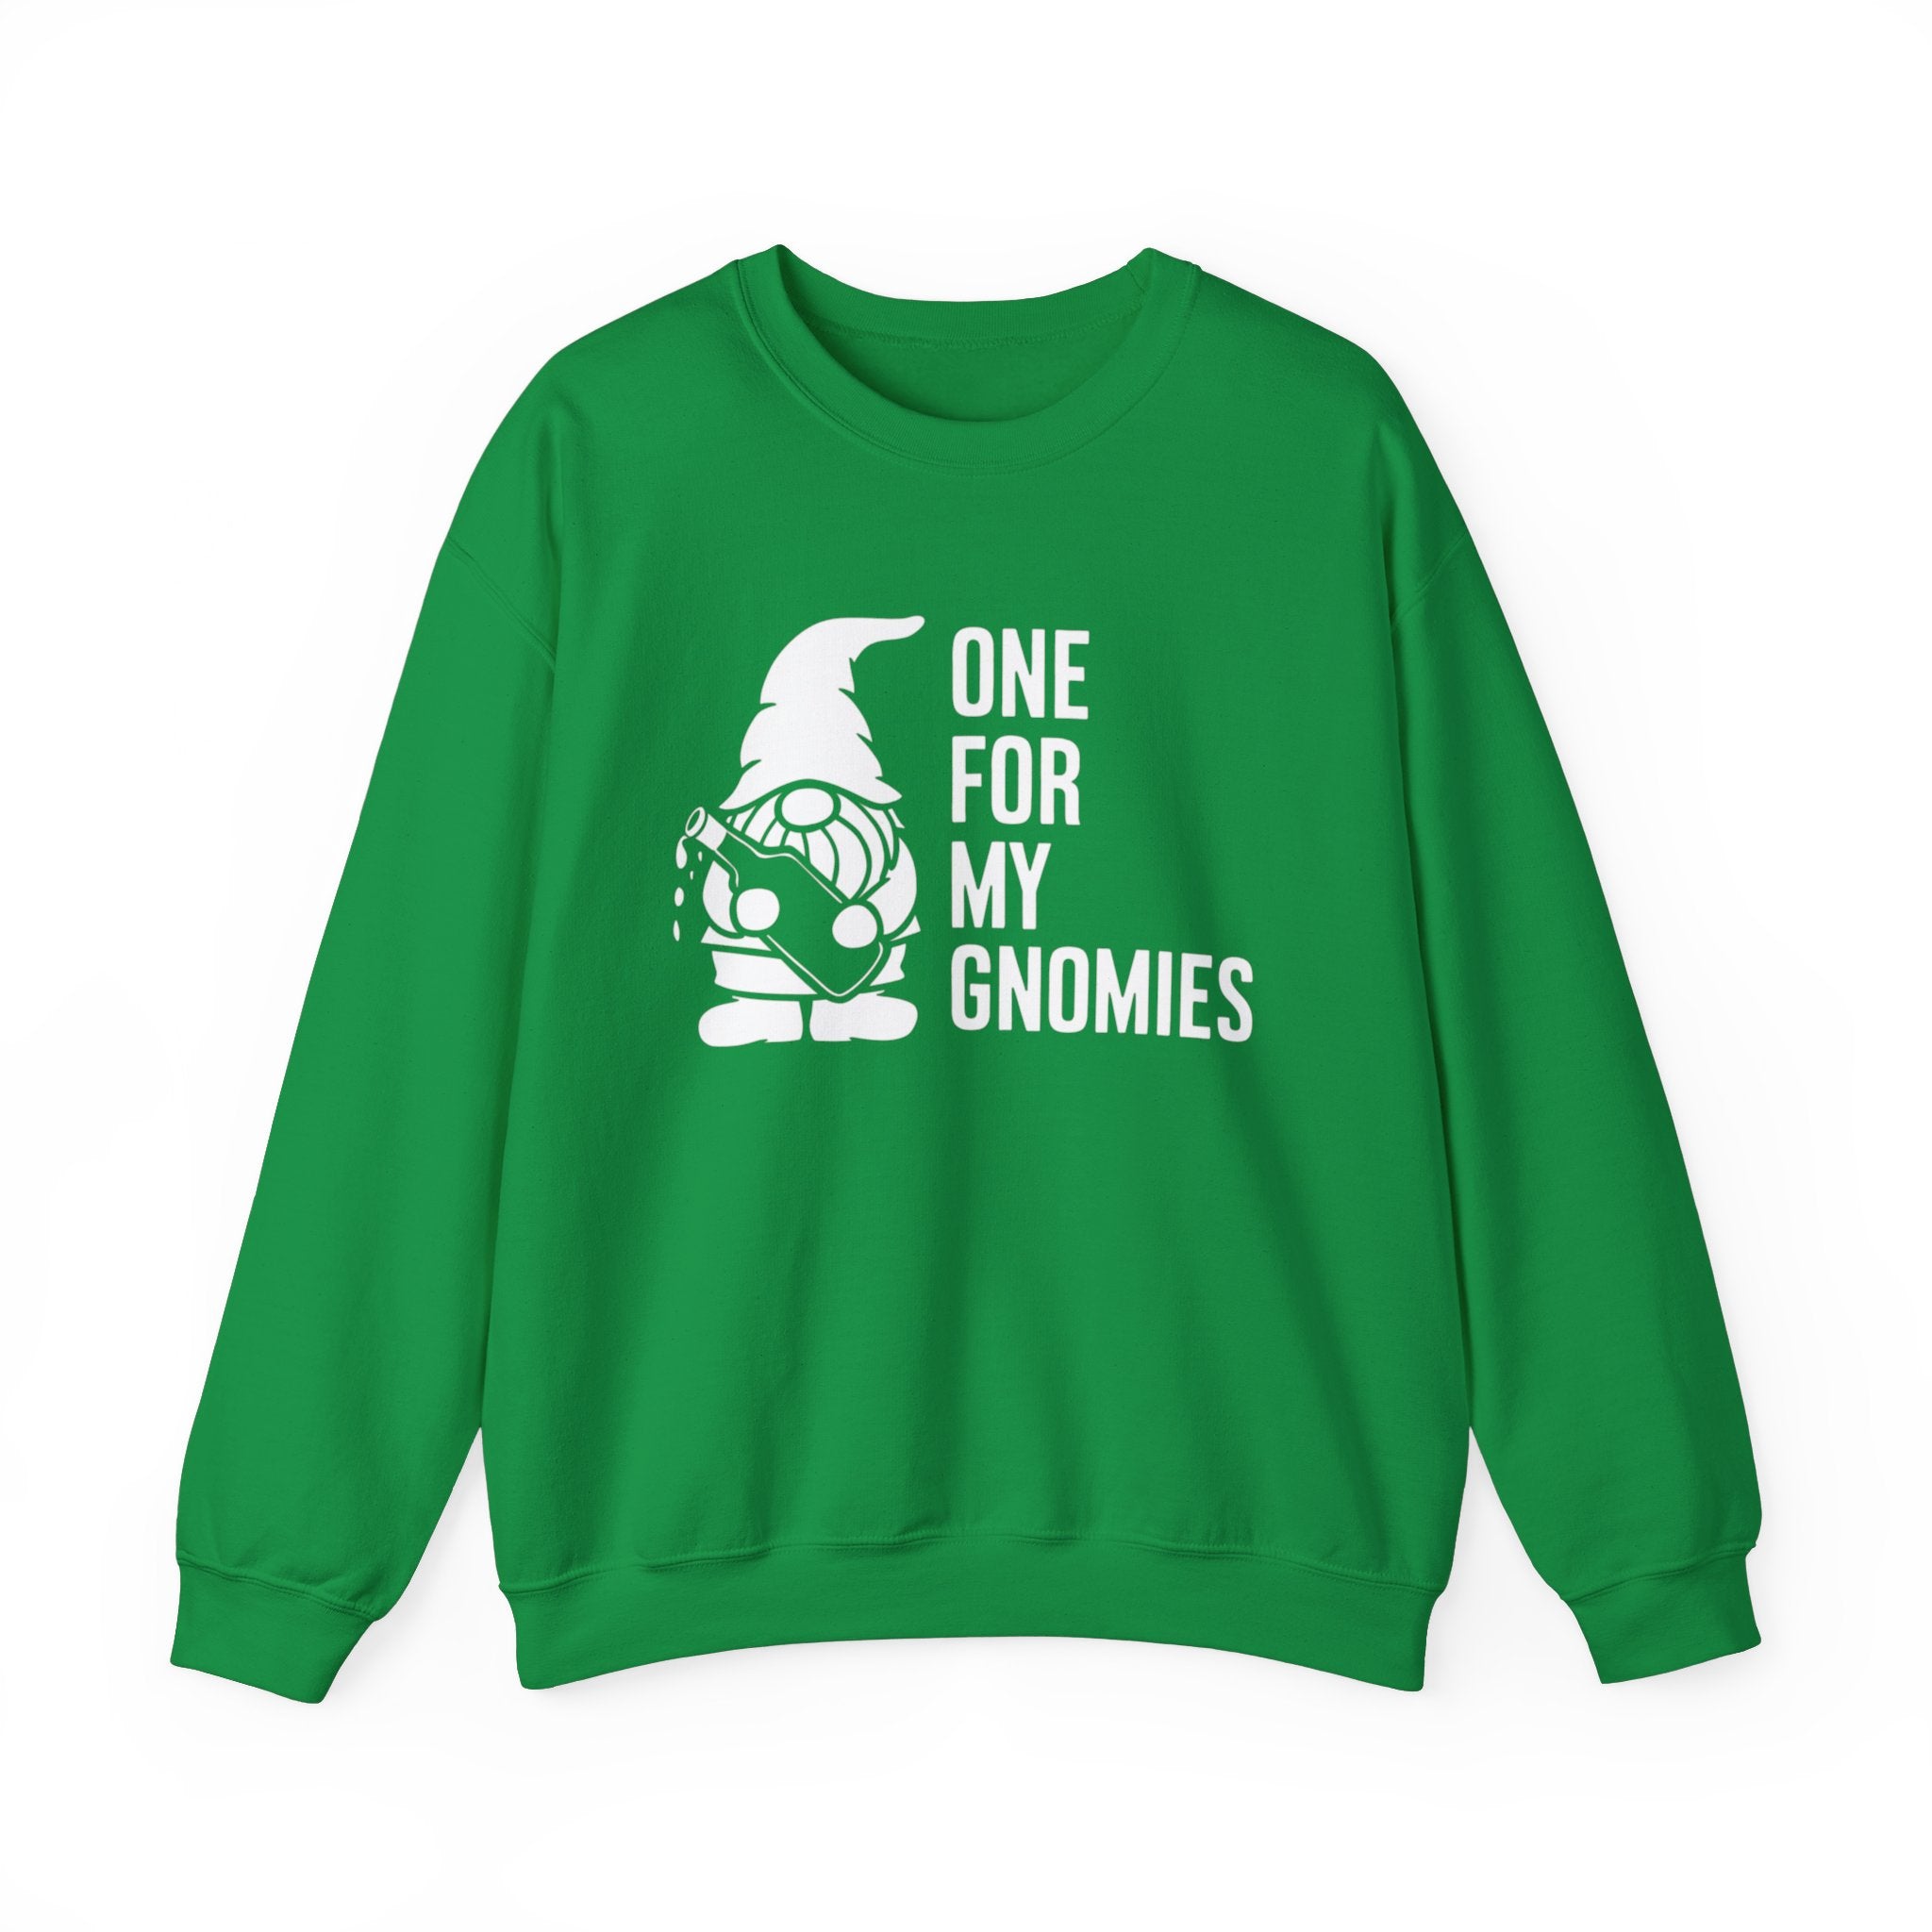 One For My Gnomies - Sweatshirt featuring a graphic of a garden gnome and the text "ONE FOR MY GNOMIES." This supremely soft, warm sweatshirt is perfect for the colder months.